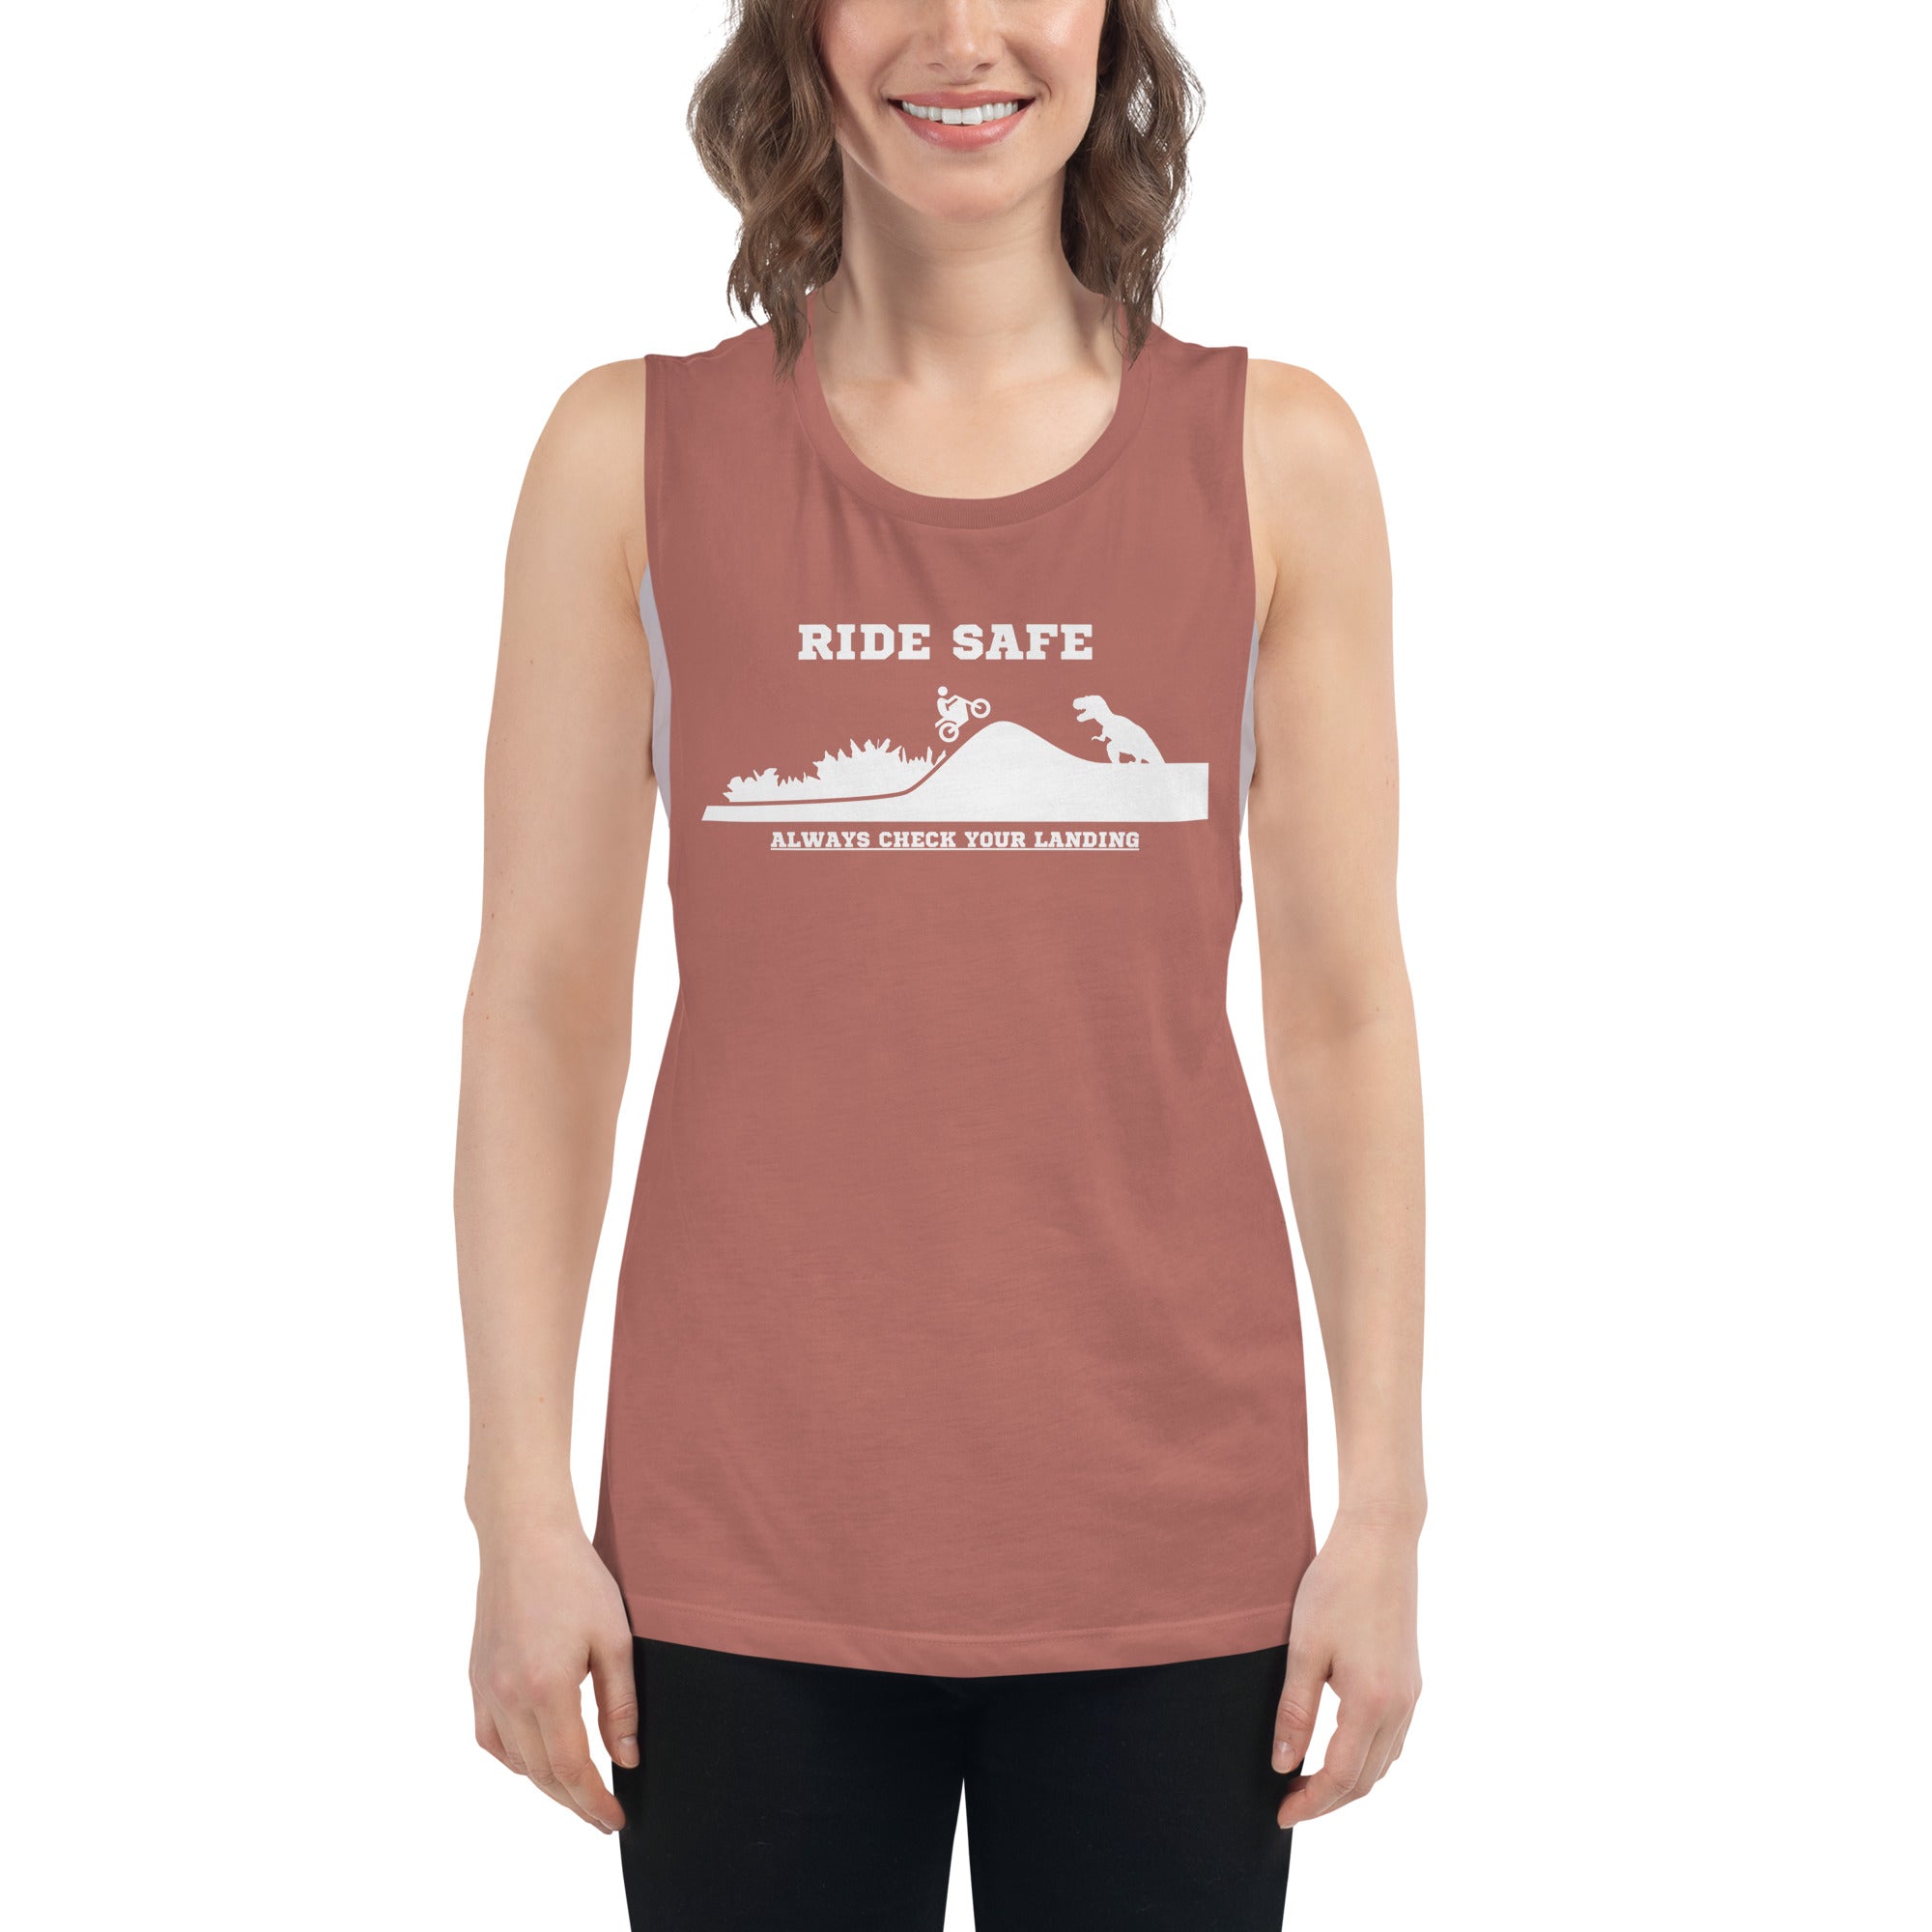 Ride Safe Check Your Landing Women's Muscle Tank